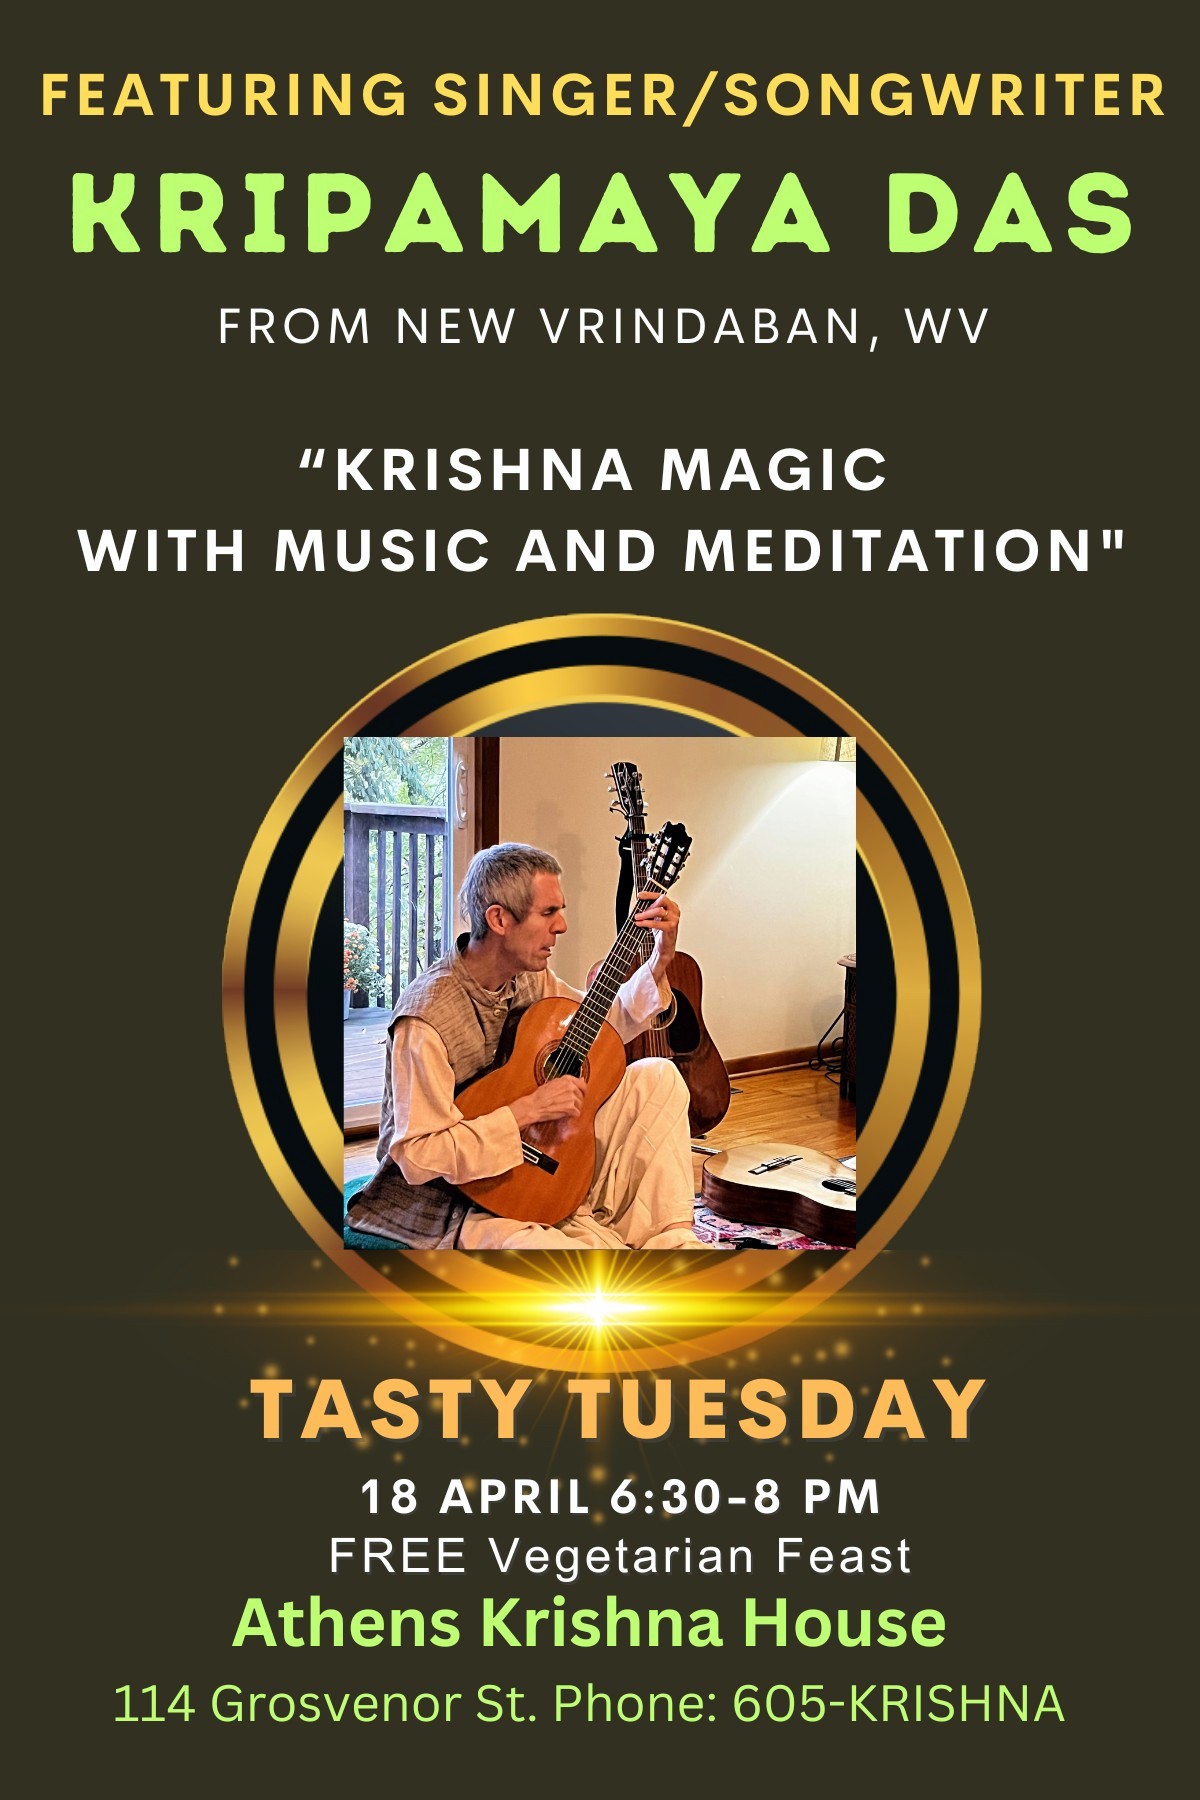 The image is a flyer for Athens Krishna House. The text reads:featuring singer-songwriter Kripamaya Das from New Vrinbaban, WV “Krishna Magic with Music and Meditation” Tasty Tuesday April 18, 6:30 p.m.- 8 p.m. Free vegetarian feast Athens Krishna House 114 Grosvenor street Phone: 605-KRISHNA